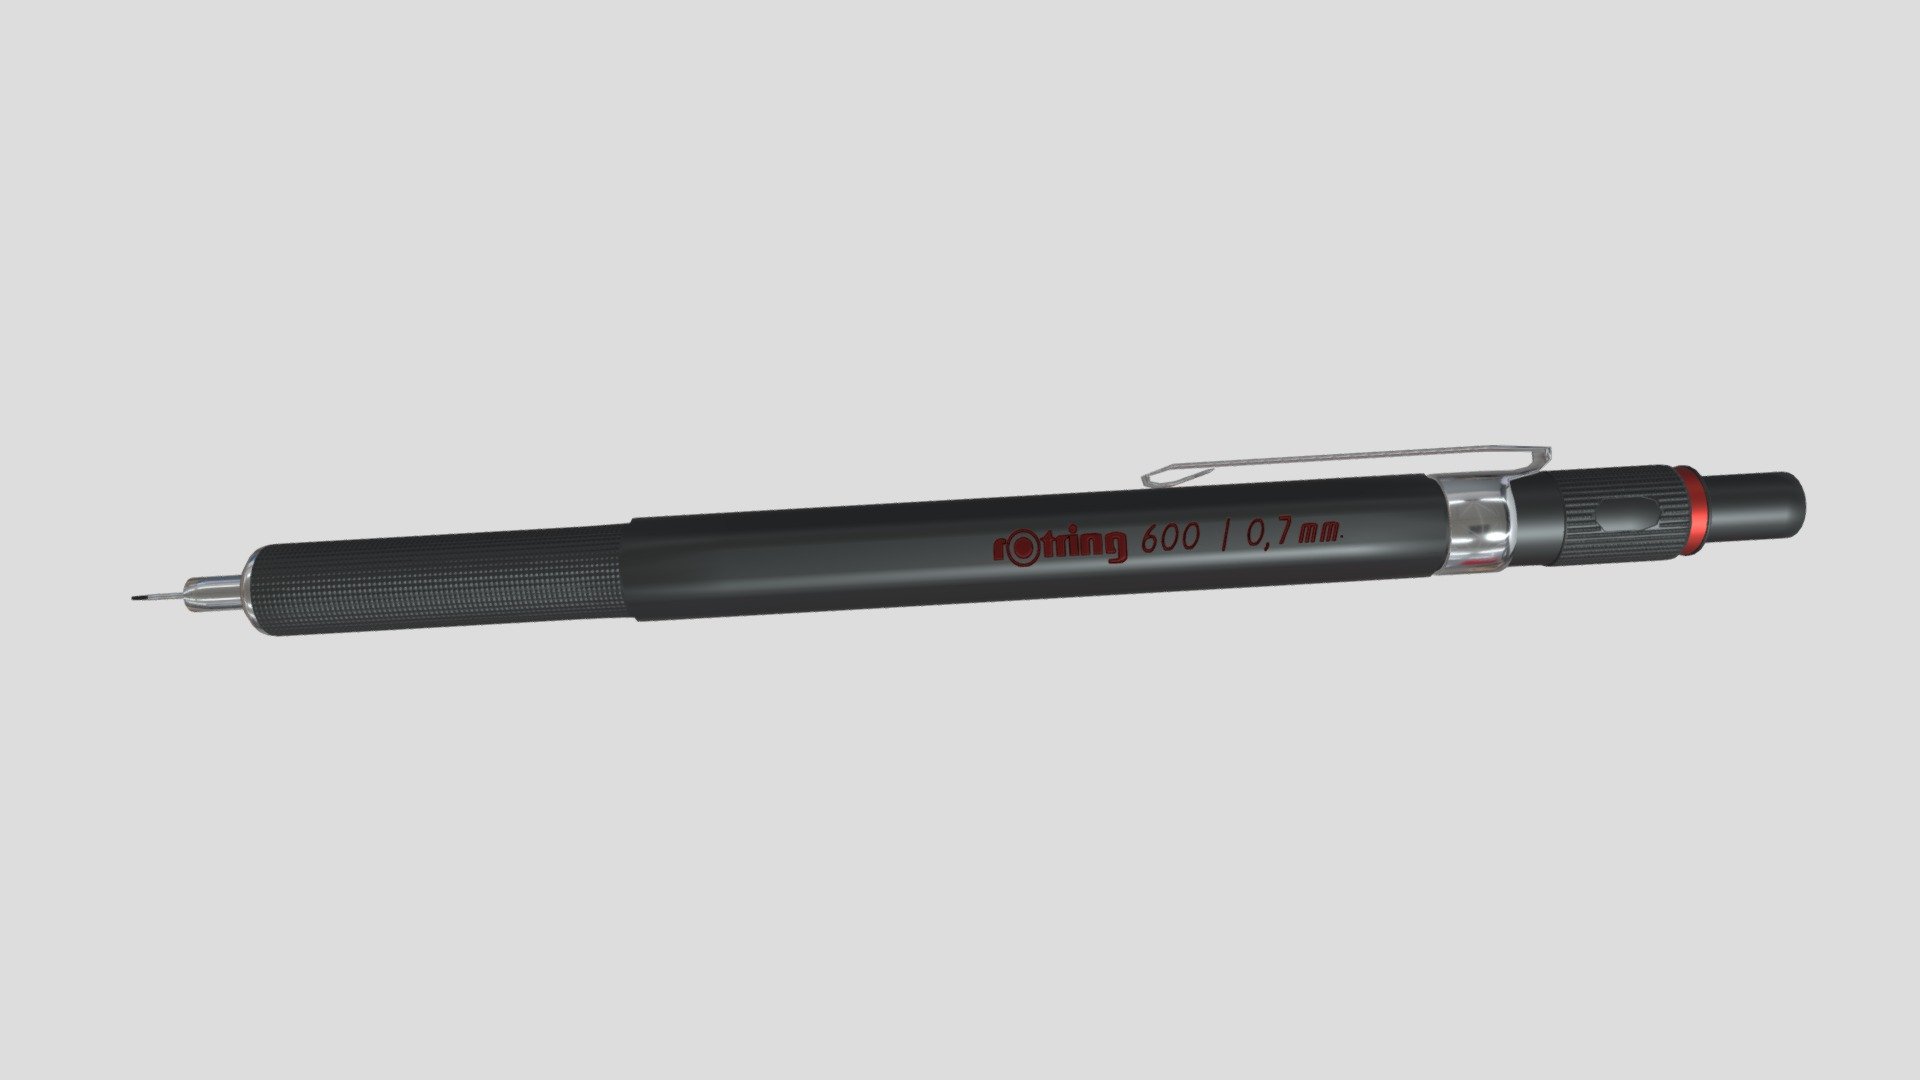 Rotring Mechanical Pencil.
Created in Blender 2.9 3d model